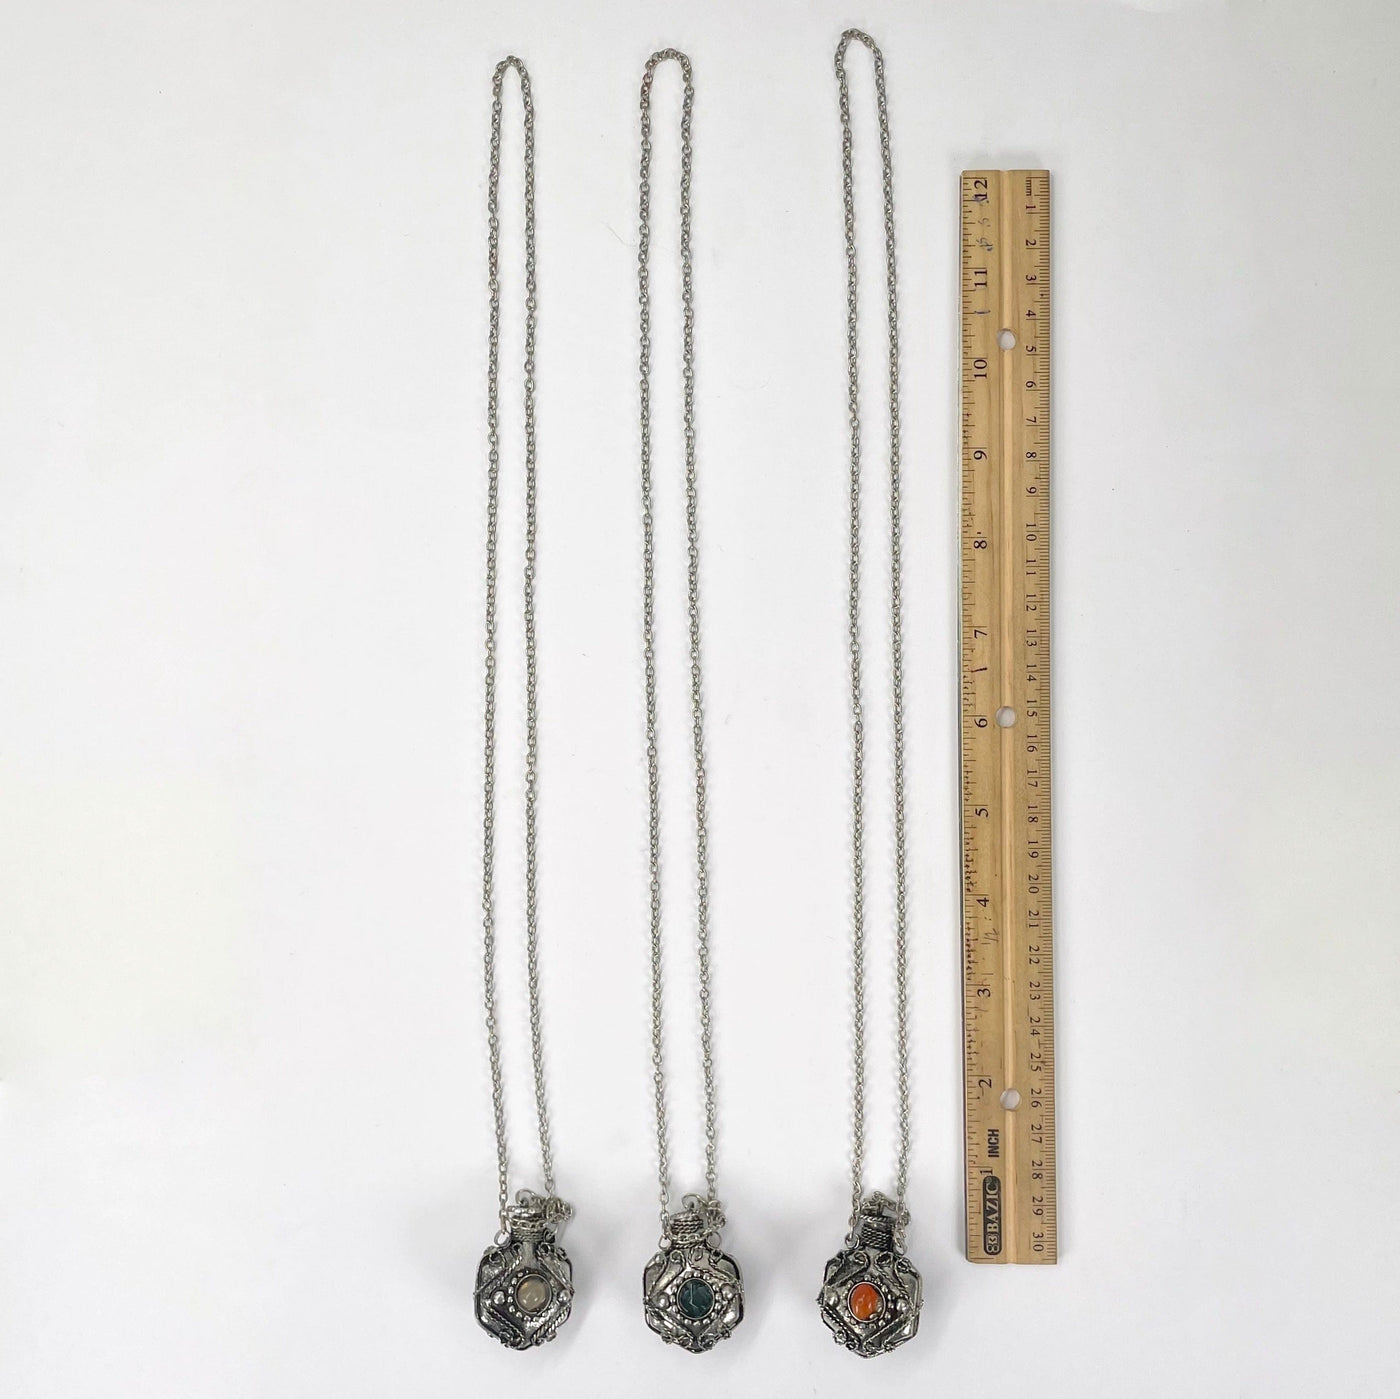 full length of bottle pendant necklaces with ruler for size reference 